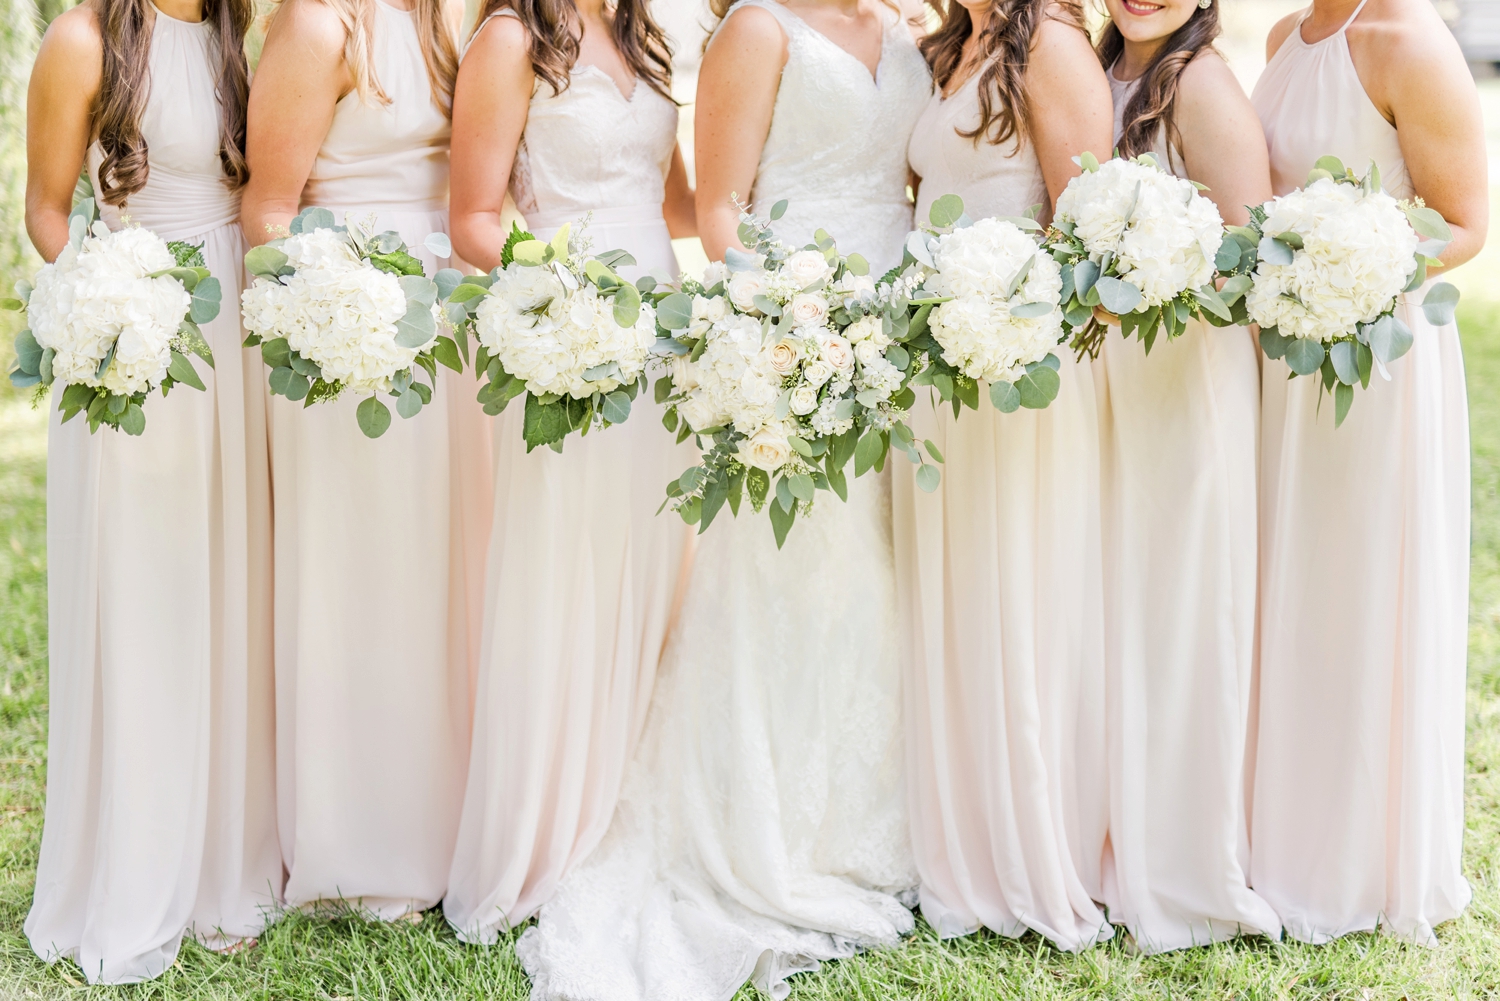 white-and-cream-bridesmaids-dresses-and-flowers